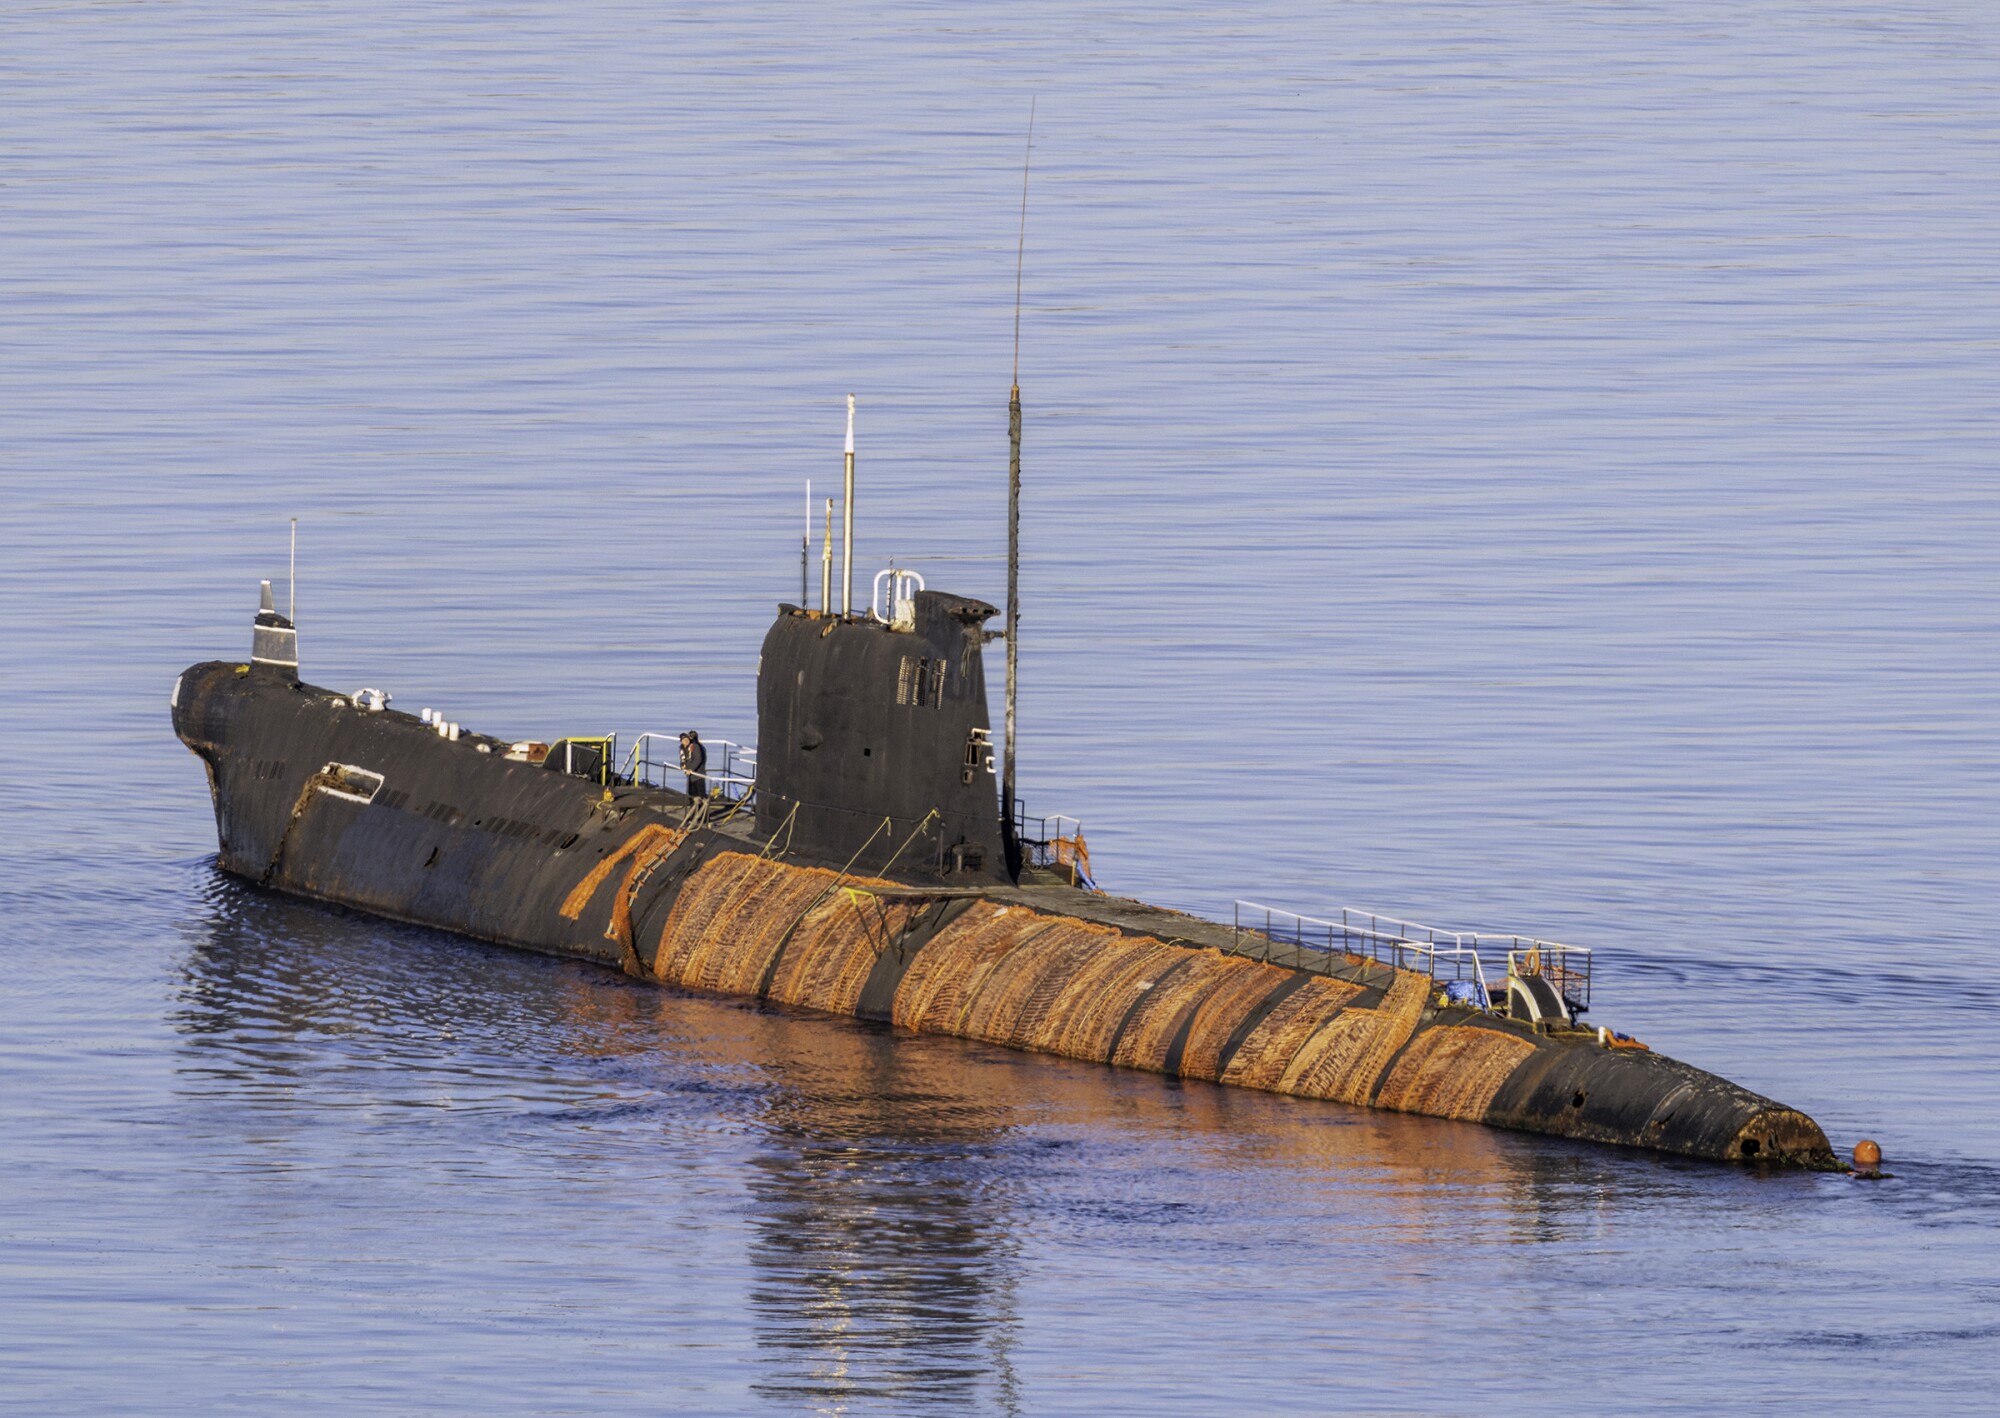 The Soviet submarine B-39 was towed out of San Diego Sunday.